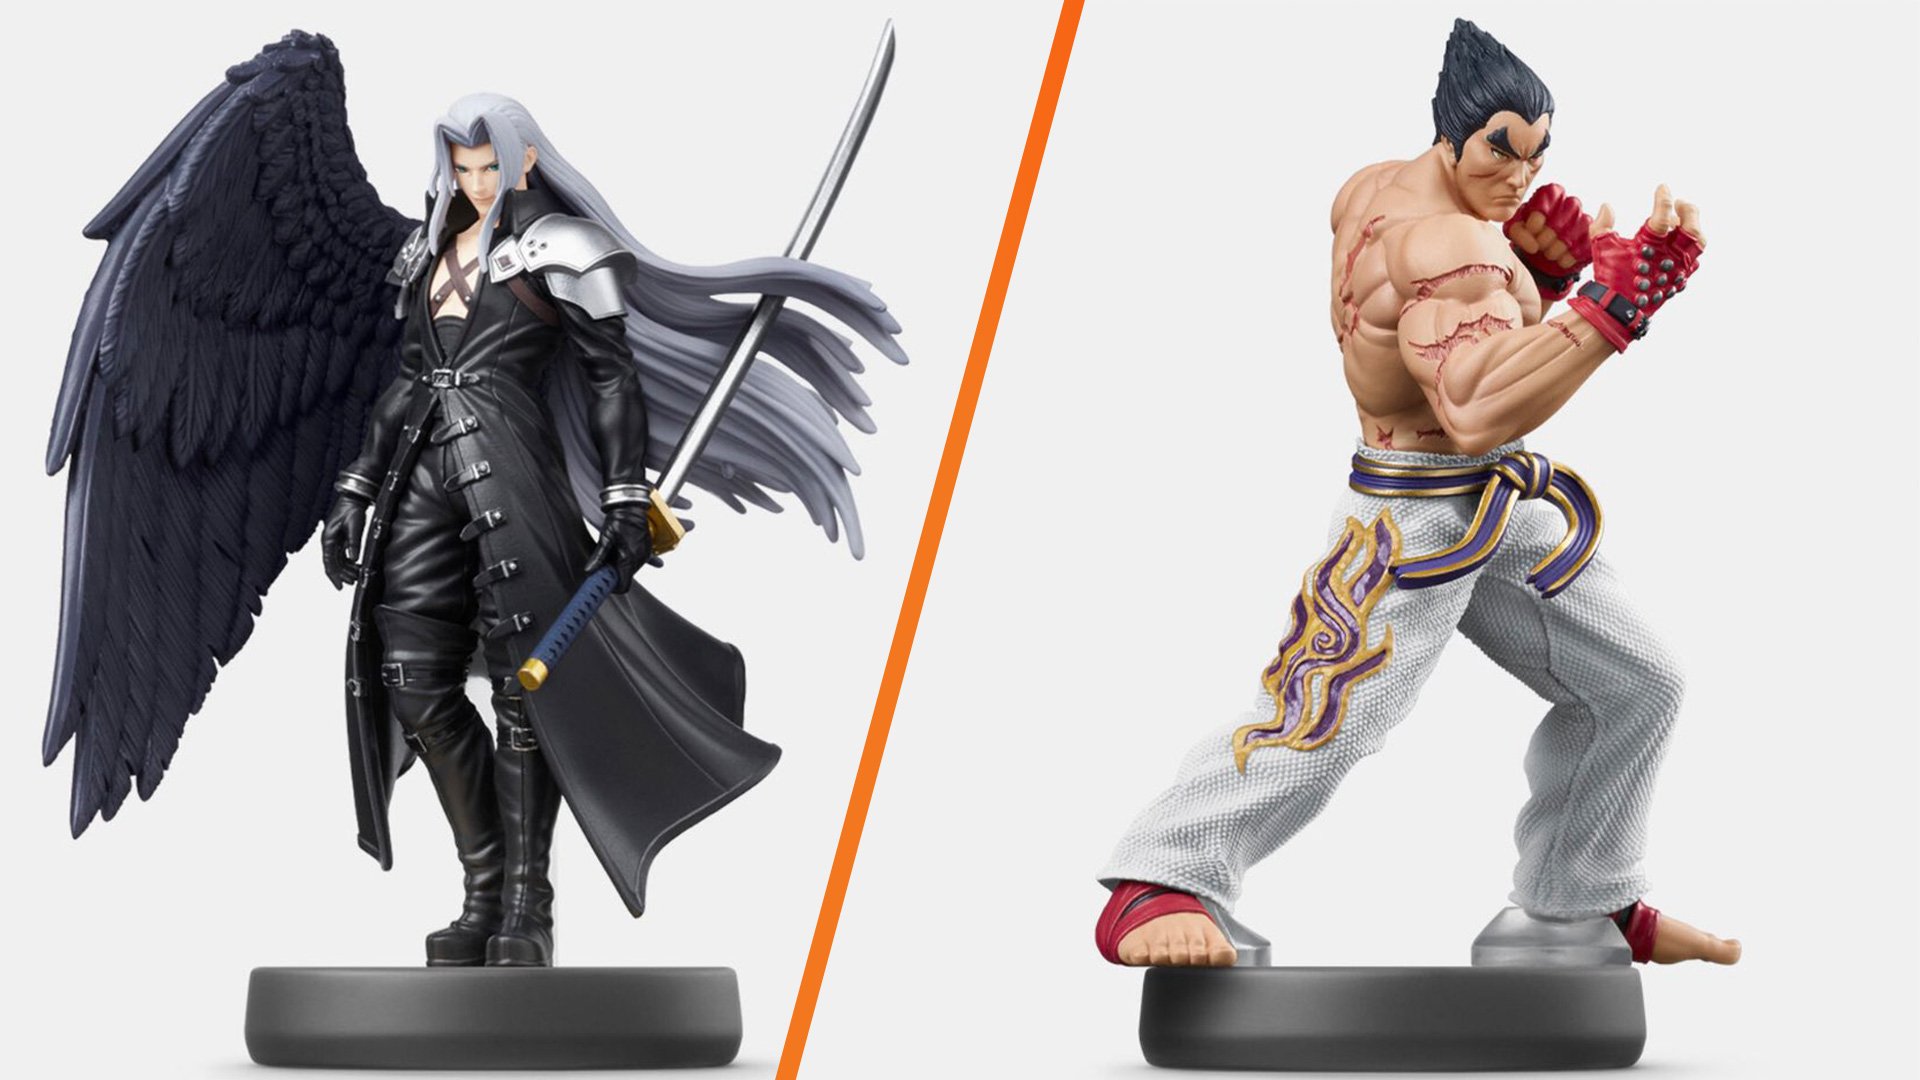 The Sephiroth and Kazuya Smash Bros amiibo will be released in 